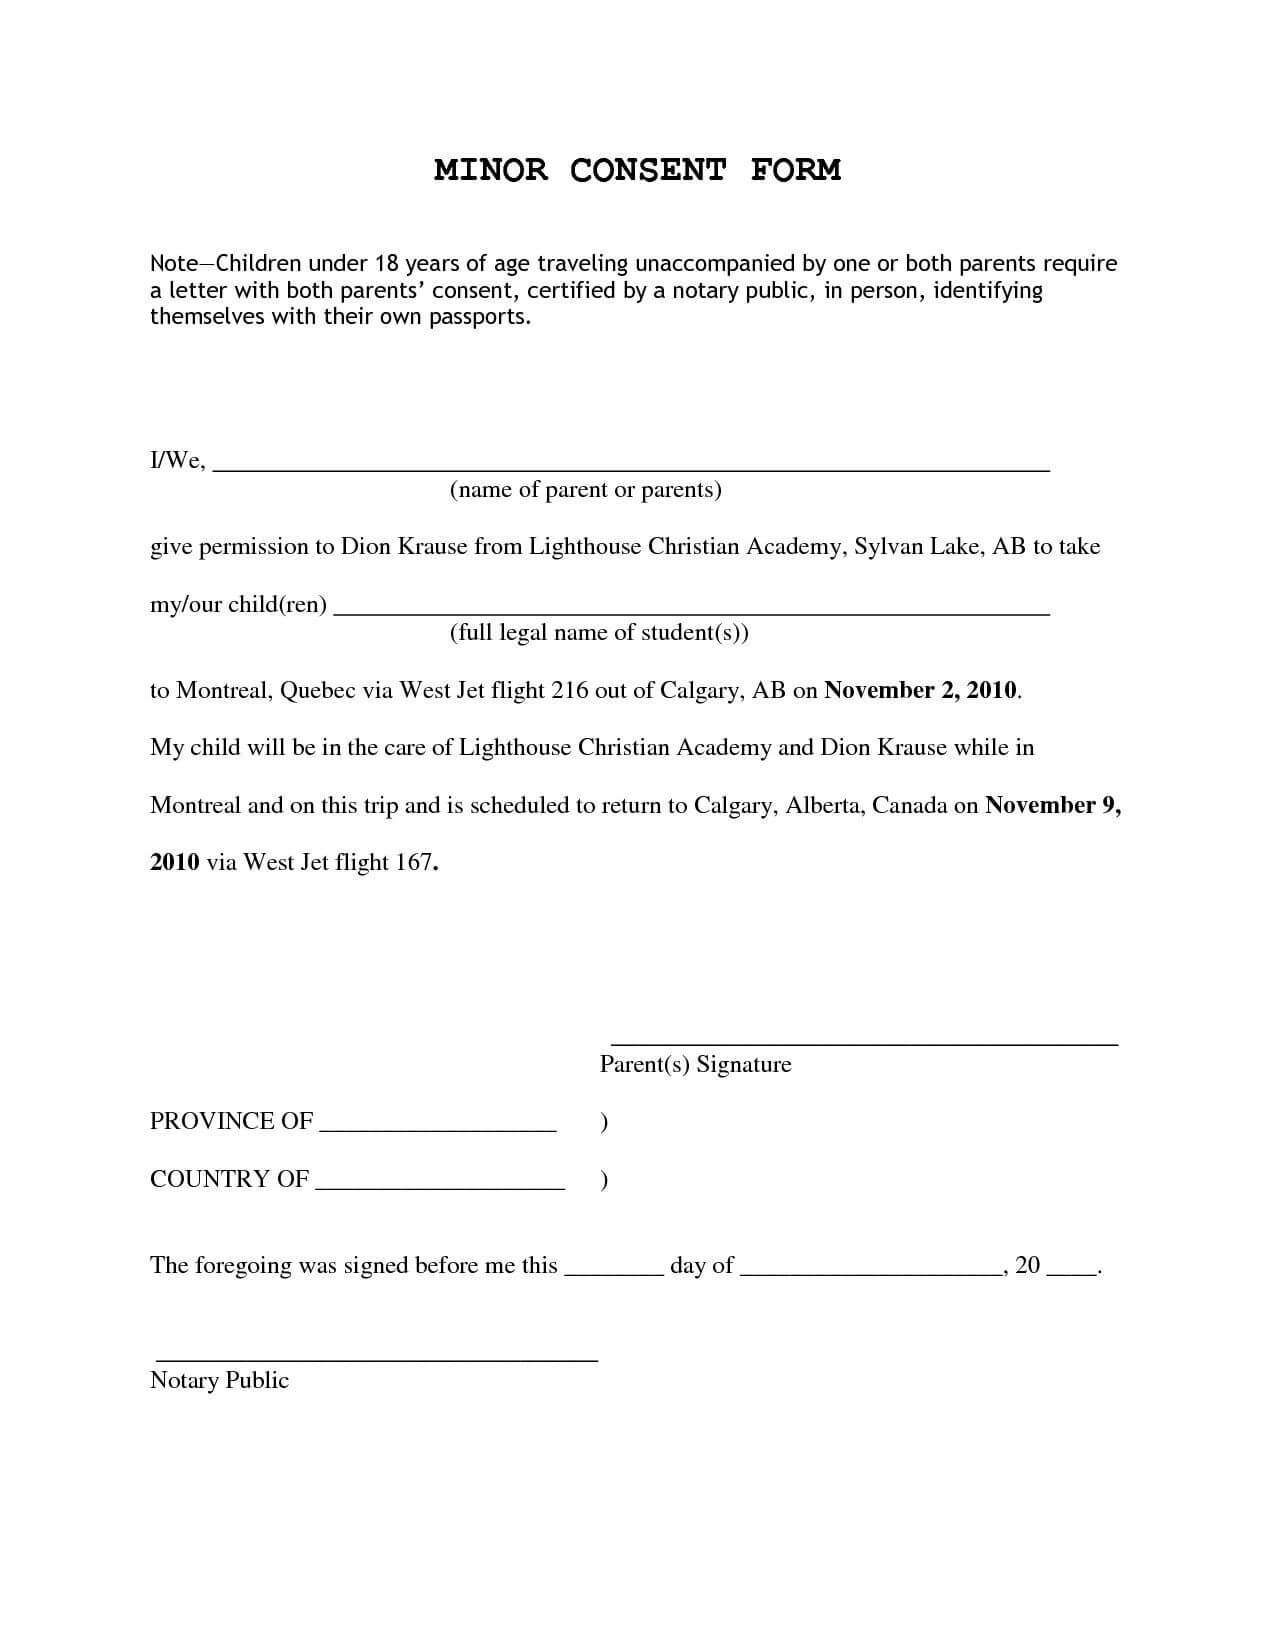 Consent Permission Inside Letter For Children Travelling Within Travel Request Form Template Word